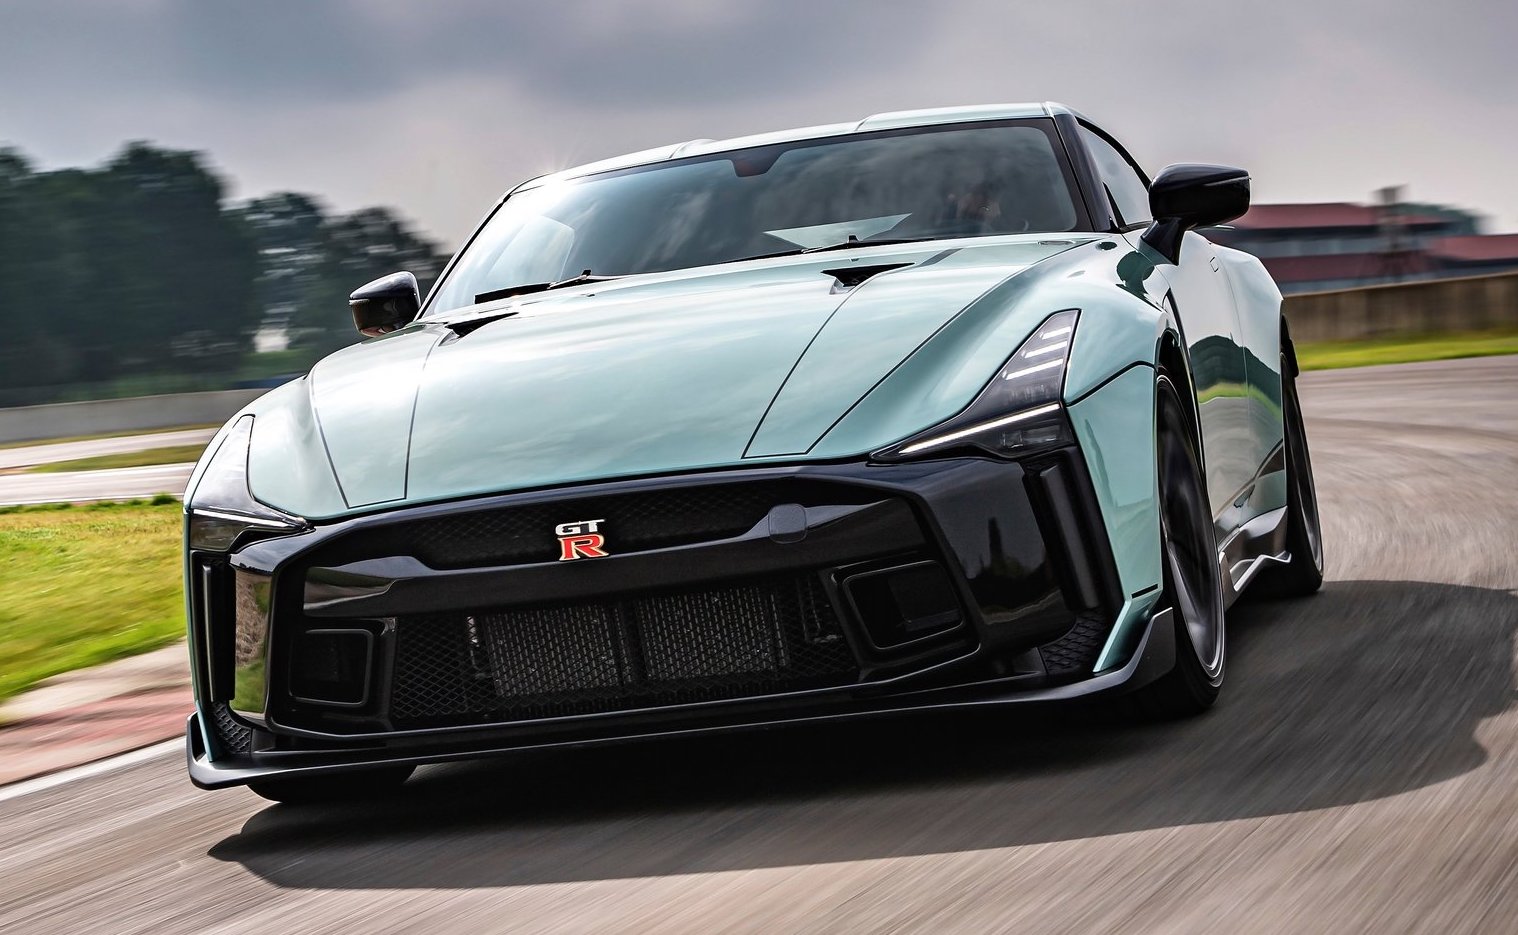 Nissan R36 GT-R set for 2023, KERS hybrid likely – report